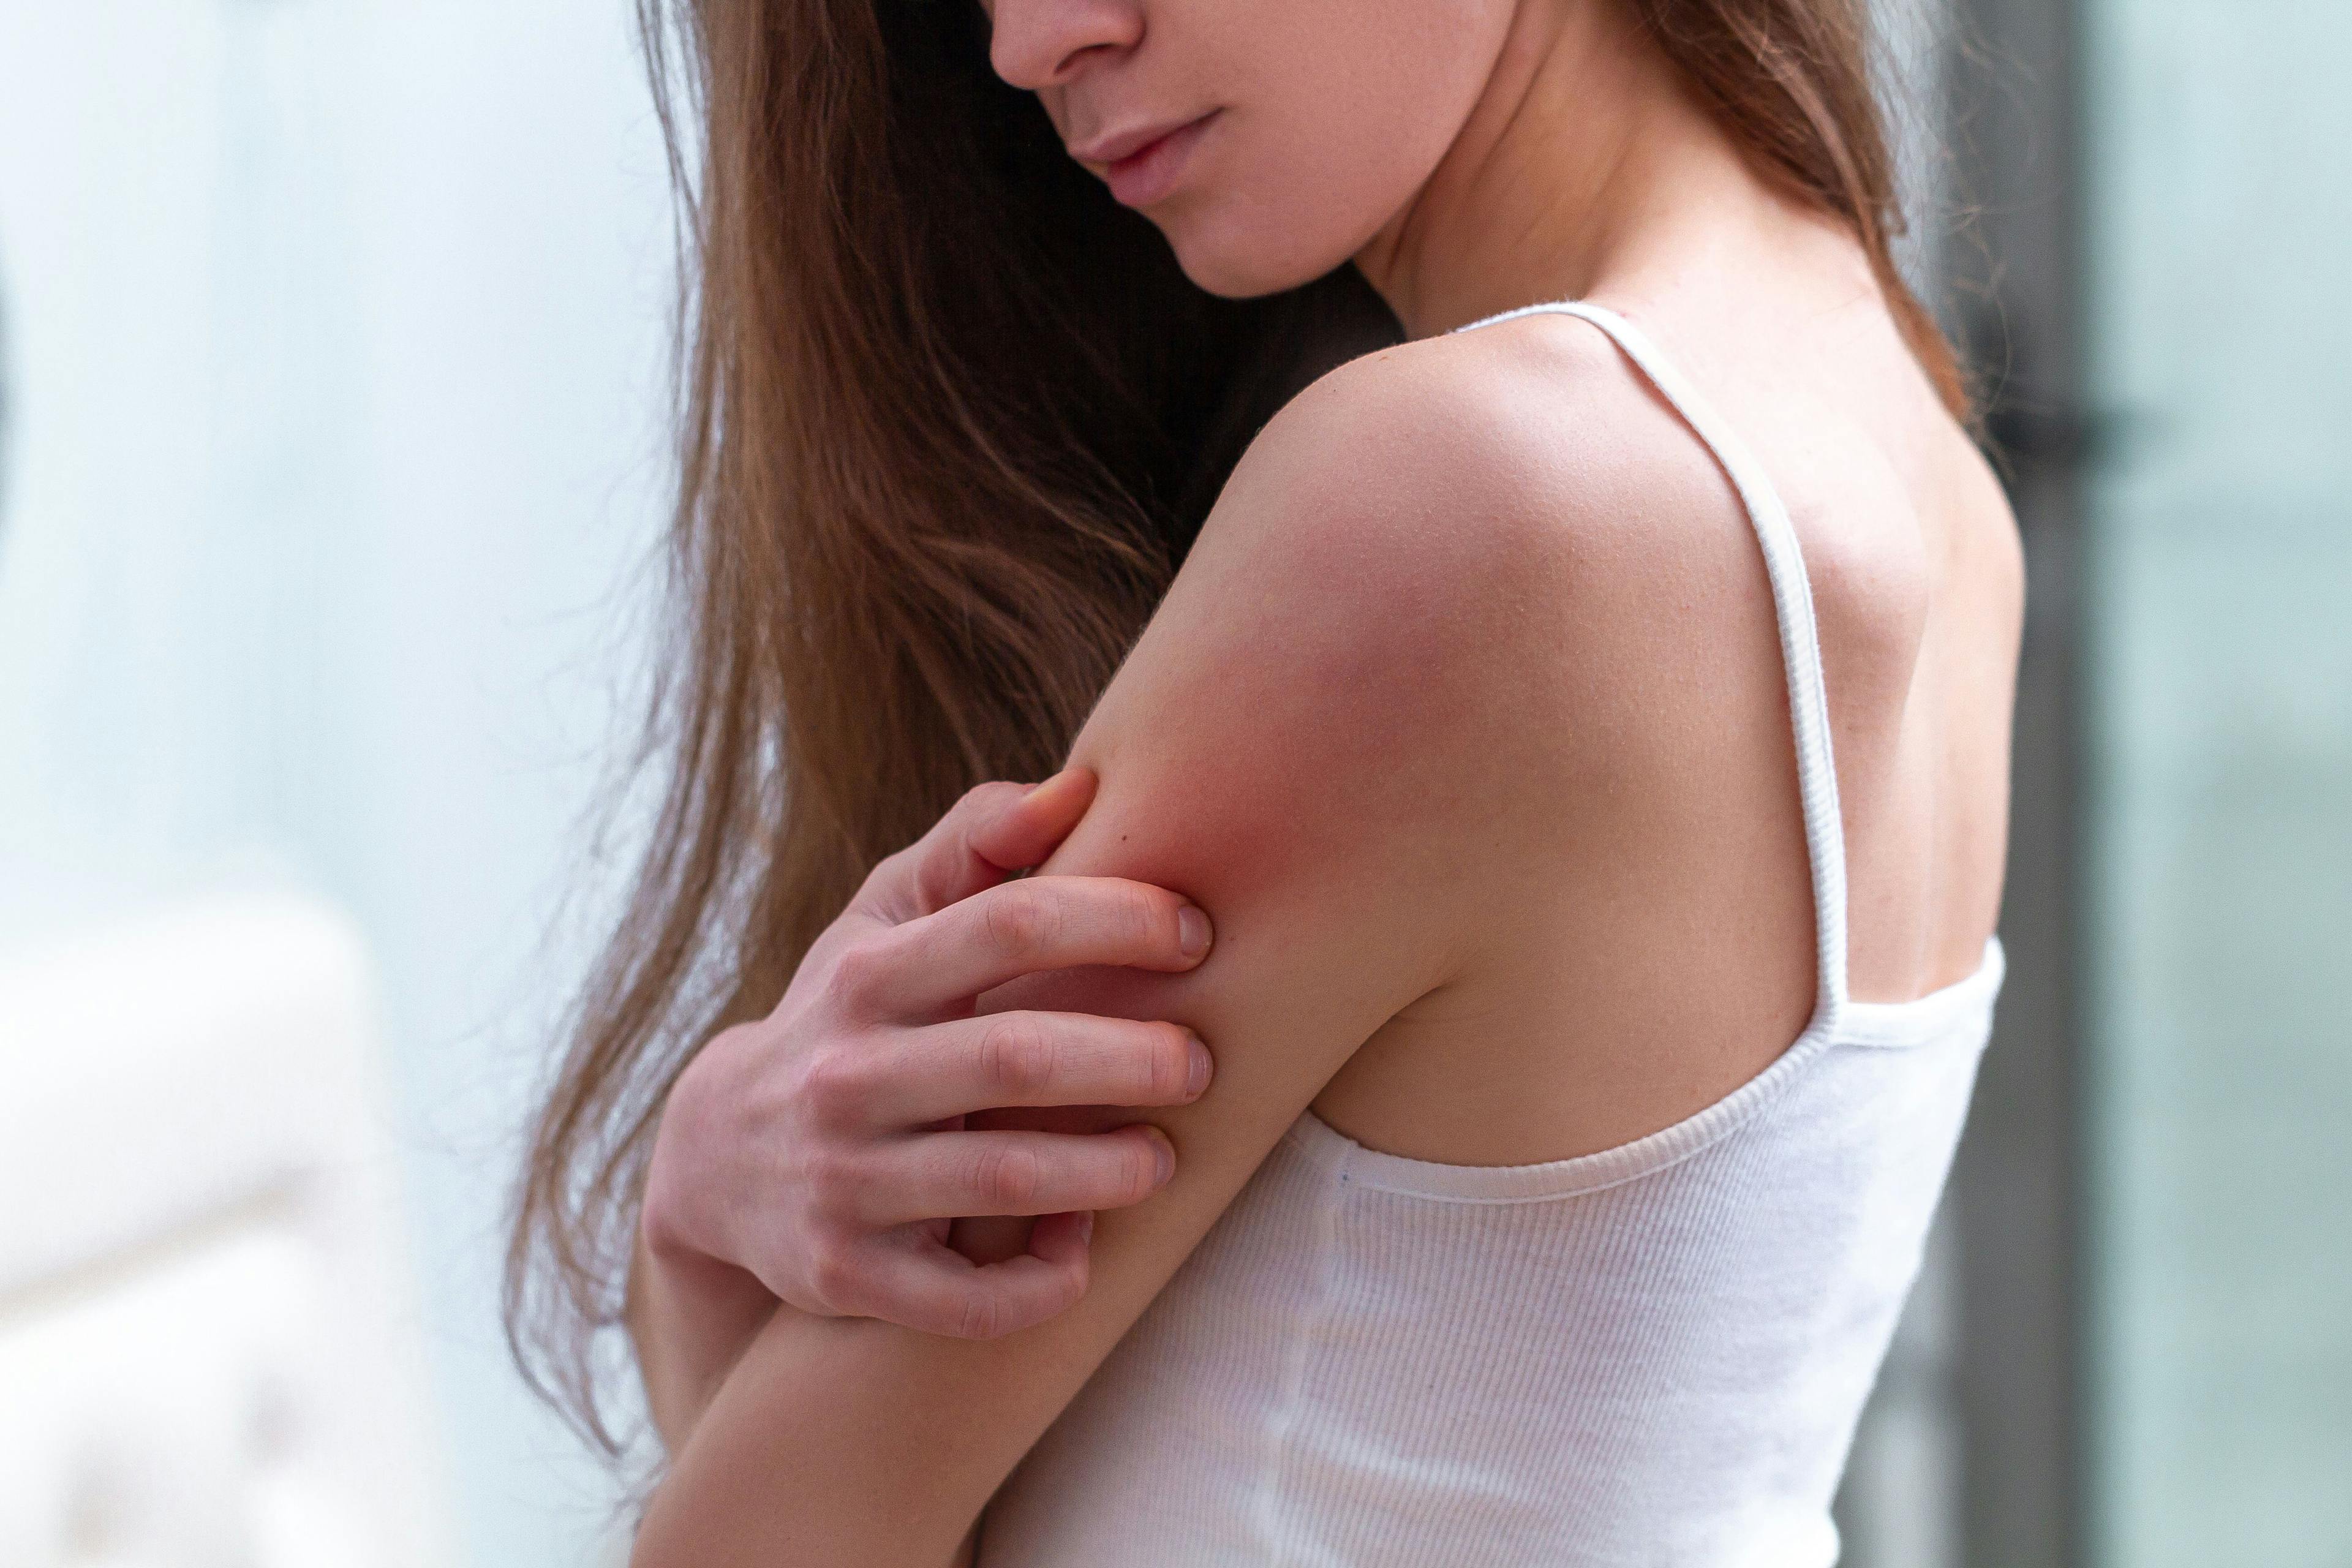 Young woman suffering from itching on her skin and scratching an itchy place | Goffkein - stock.adobe.com